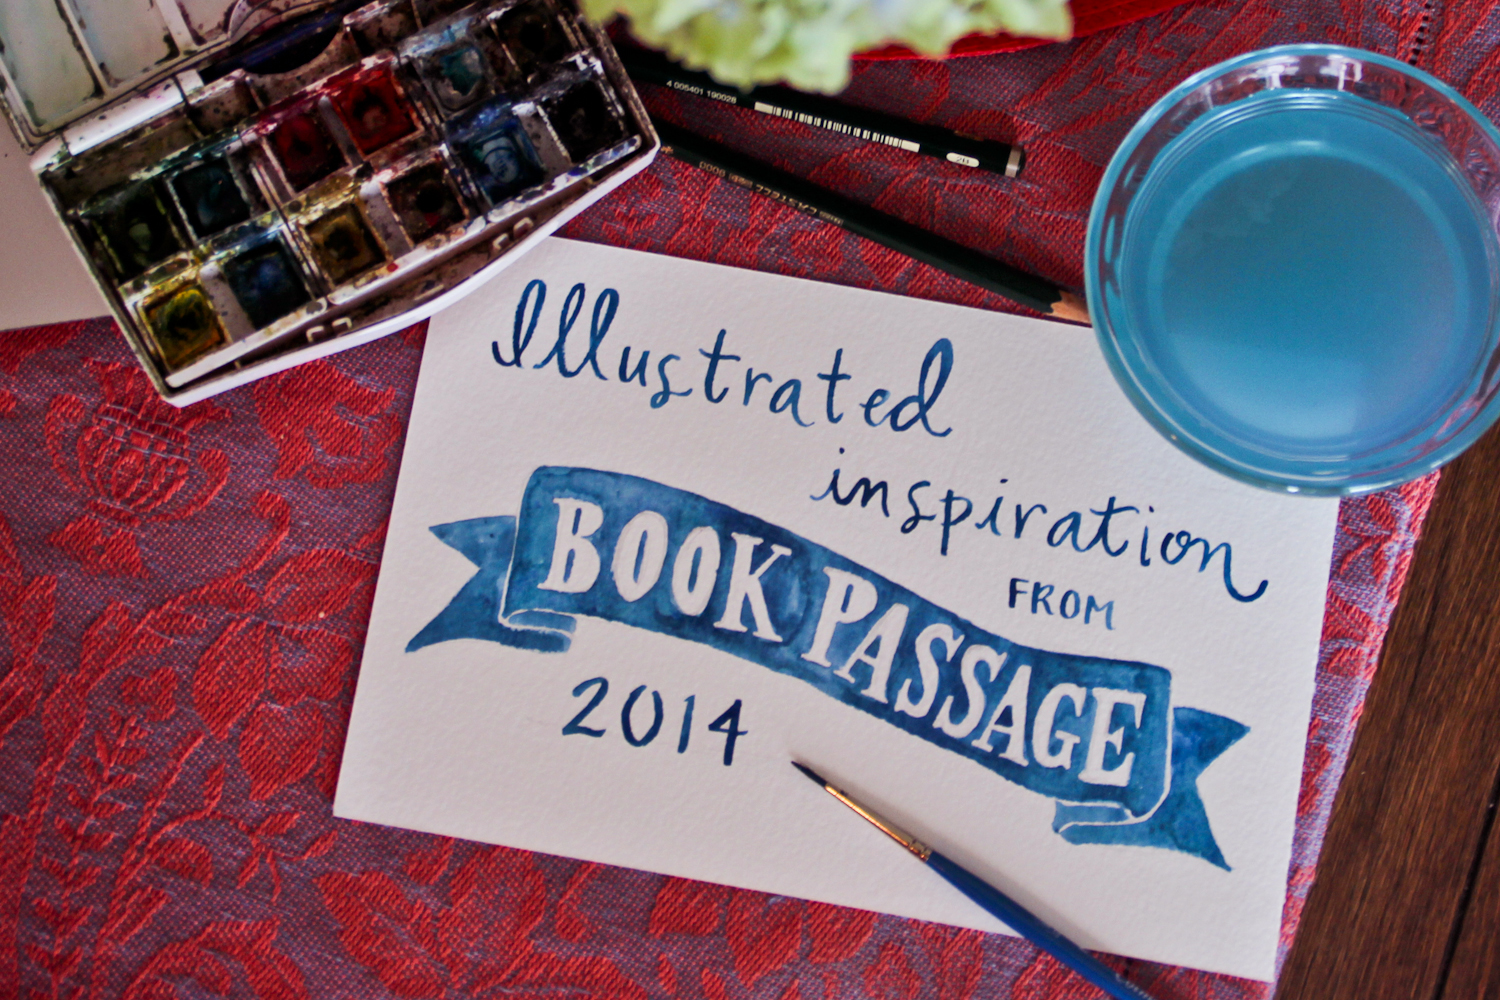 Illustrated inspiration from Book Passage Travel Writers Conference 2014.